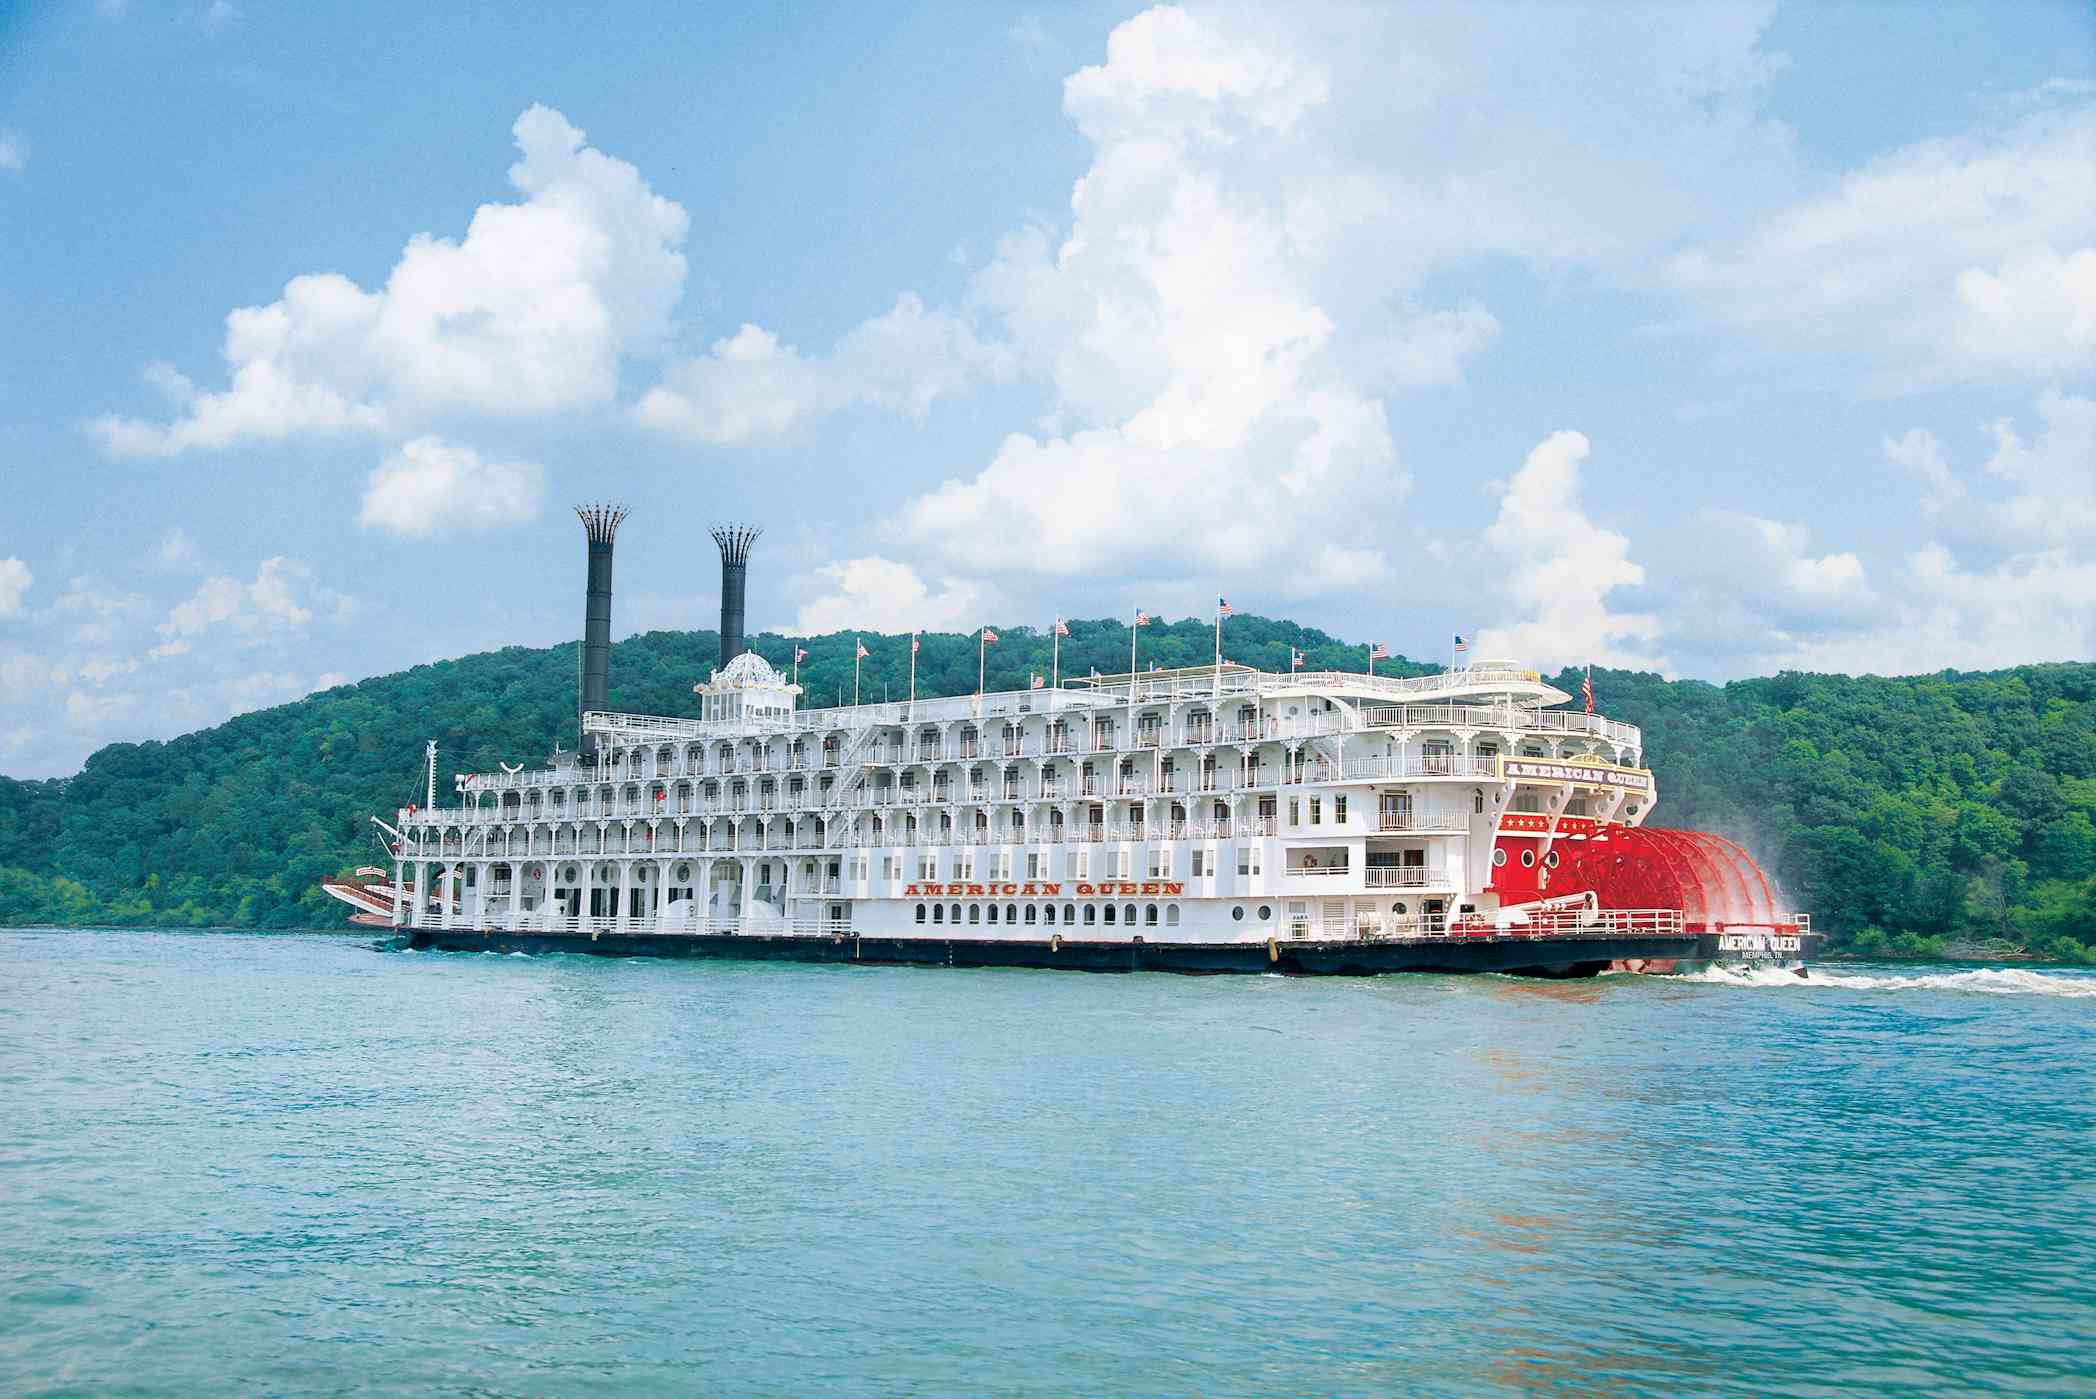 U.S. River Cruises: 9 Things to Know